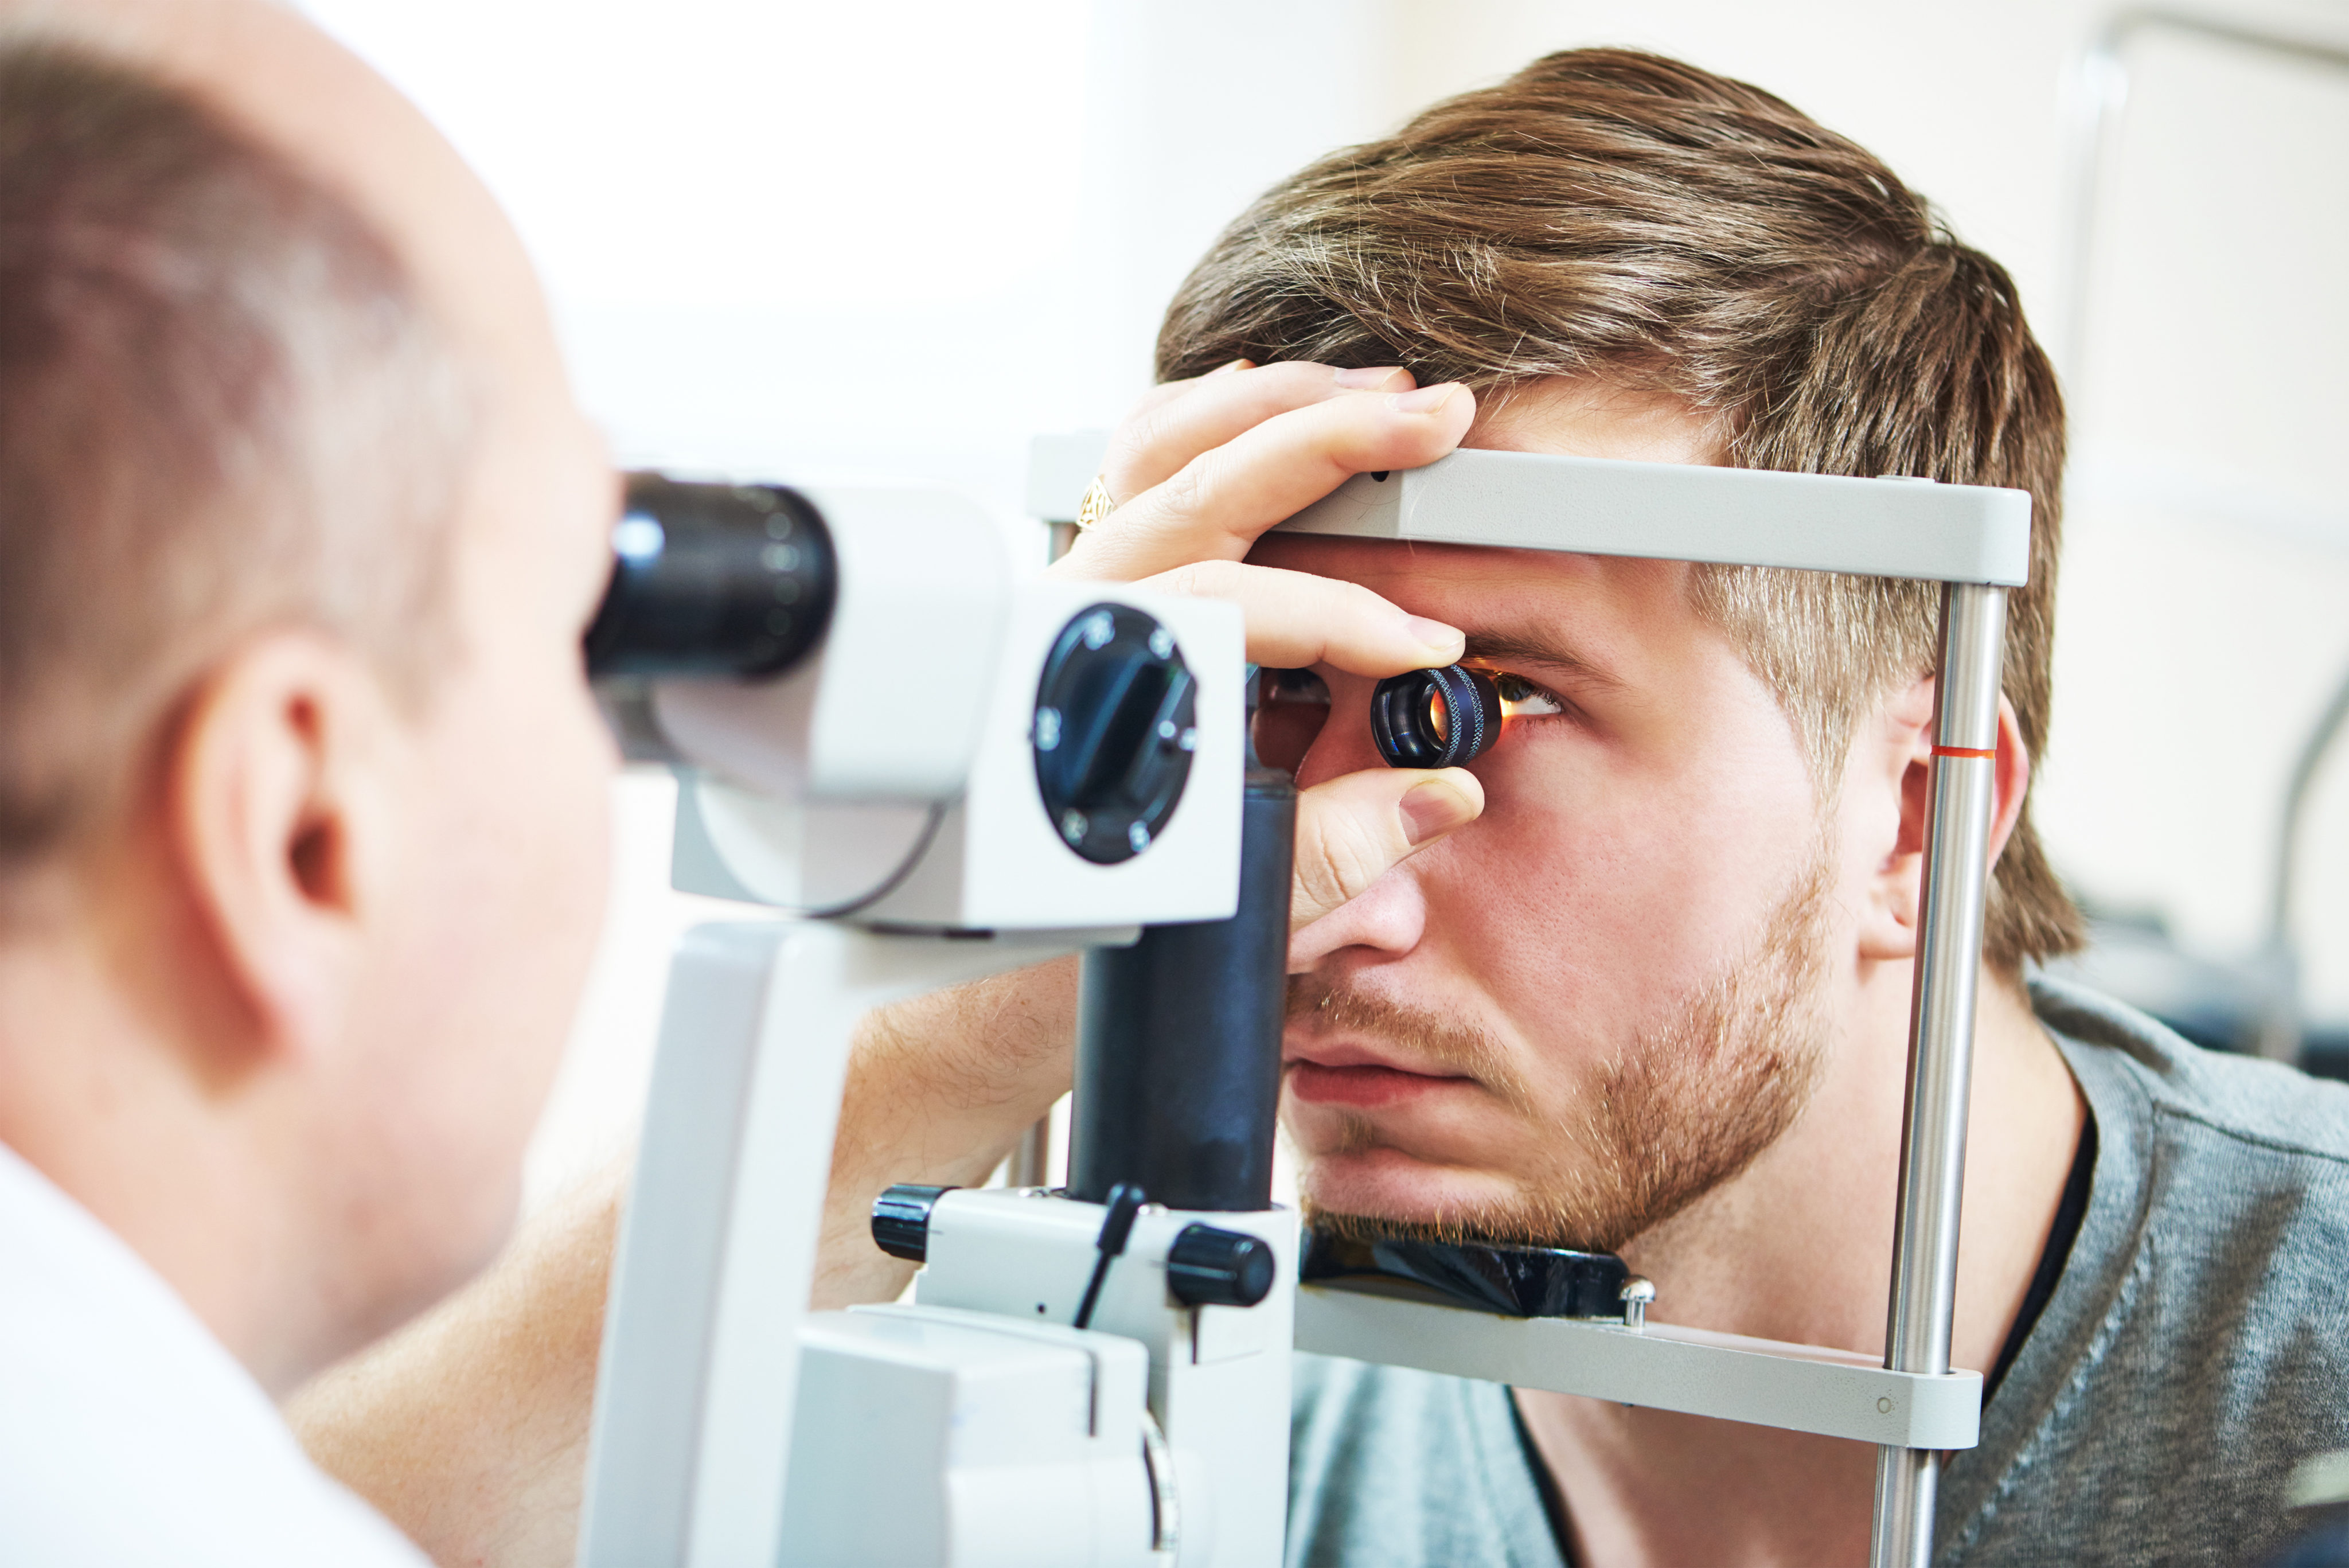 If you’re experiencing eye health concerns,call Dr. Goosey at 713.558. 